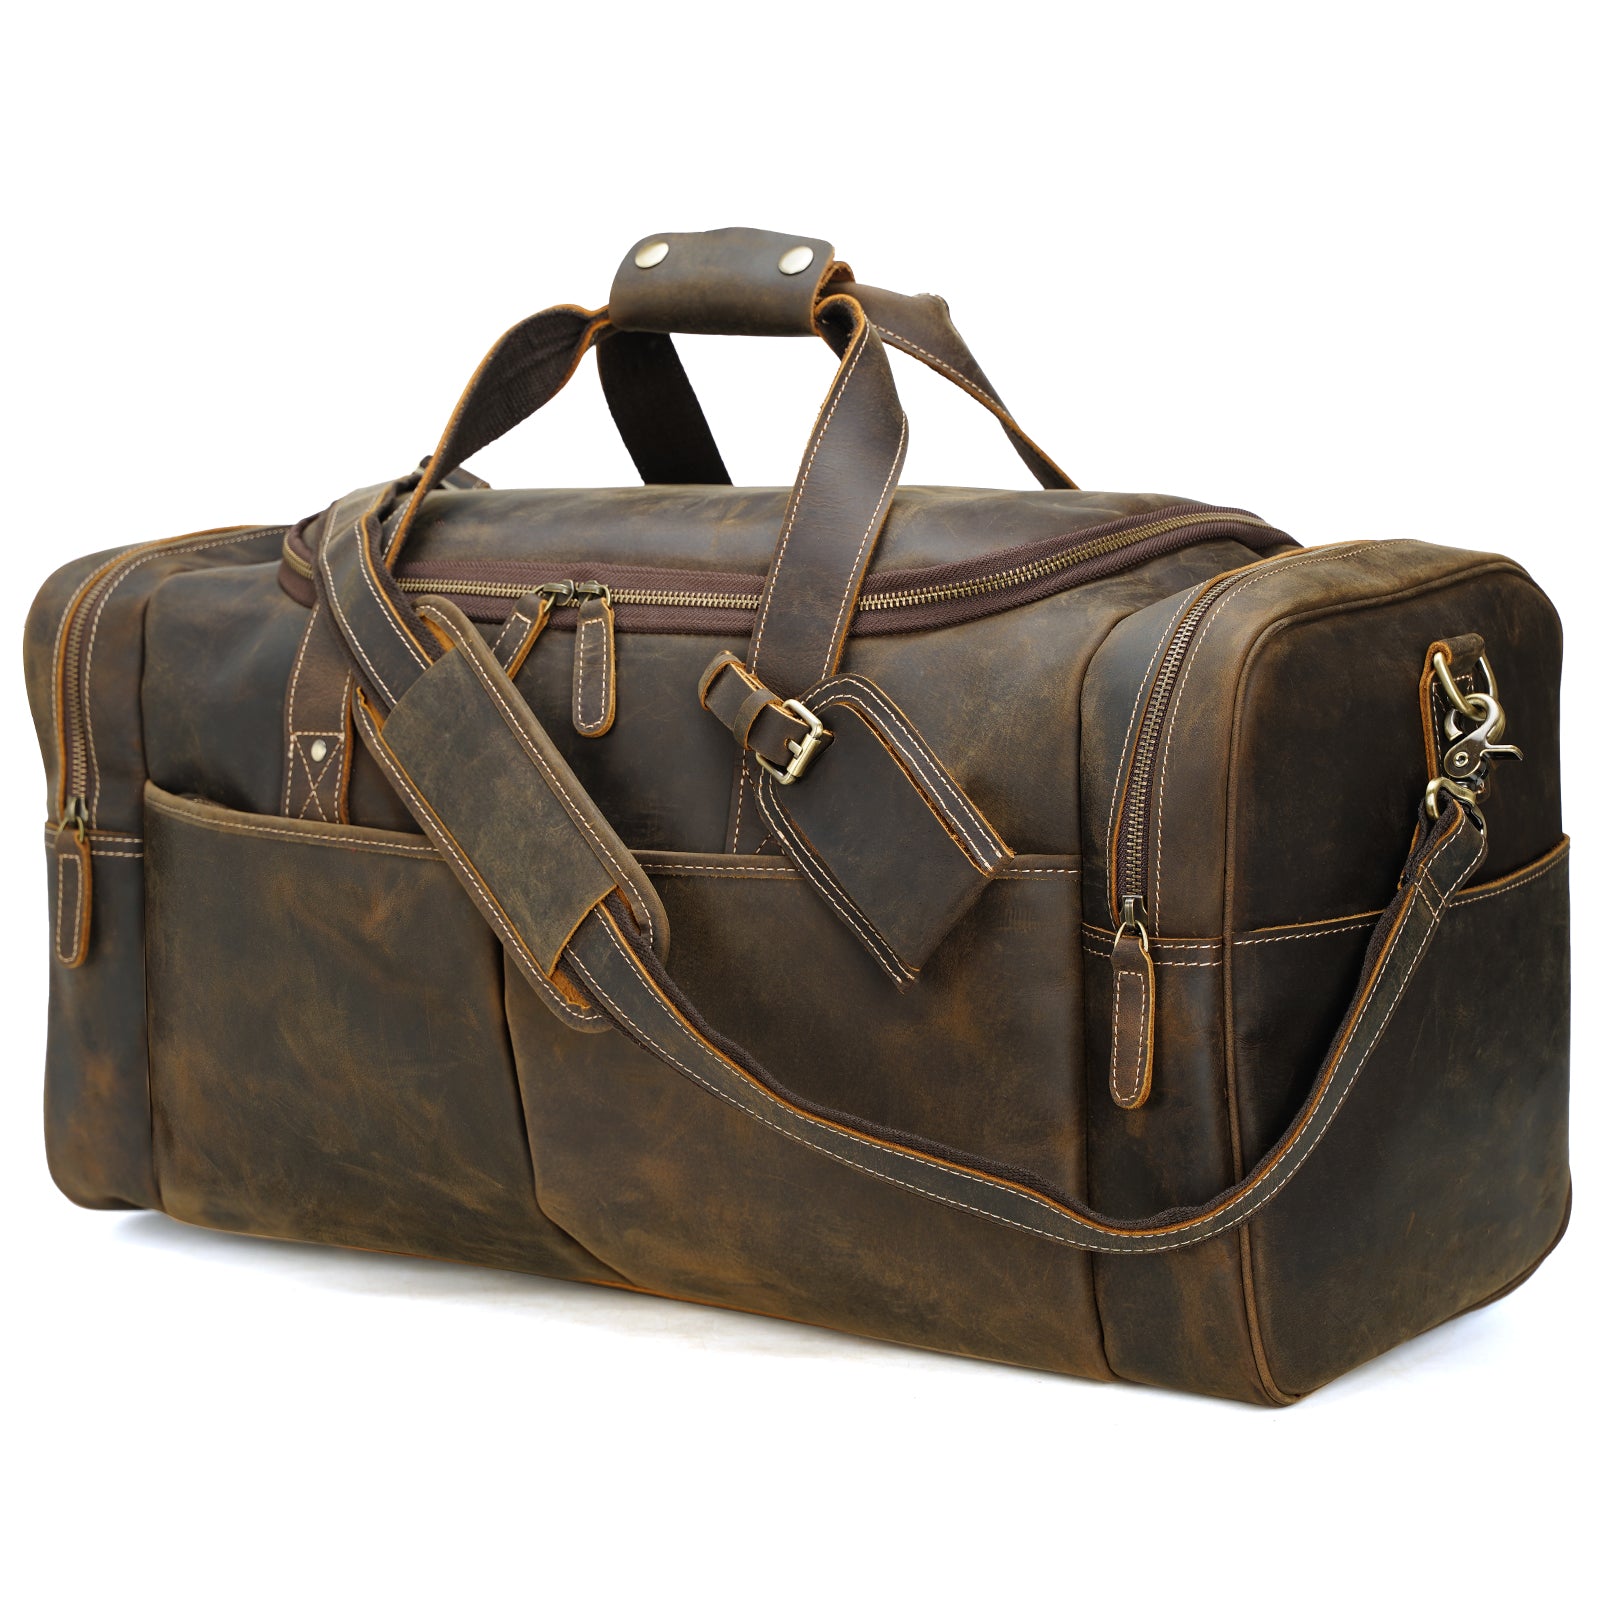 New 24 Genuine Leather Duffle Bag, Men Overnight Carry-On Travel Luggage  Gym